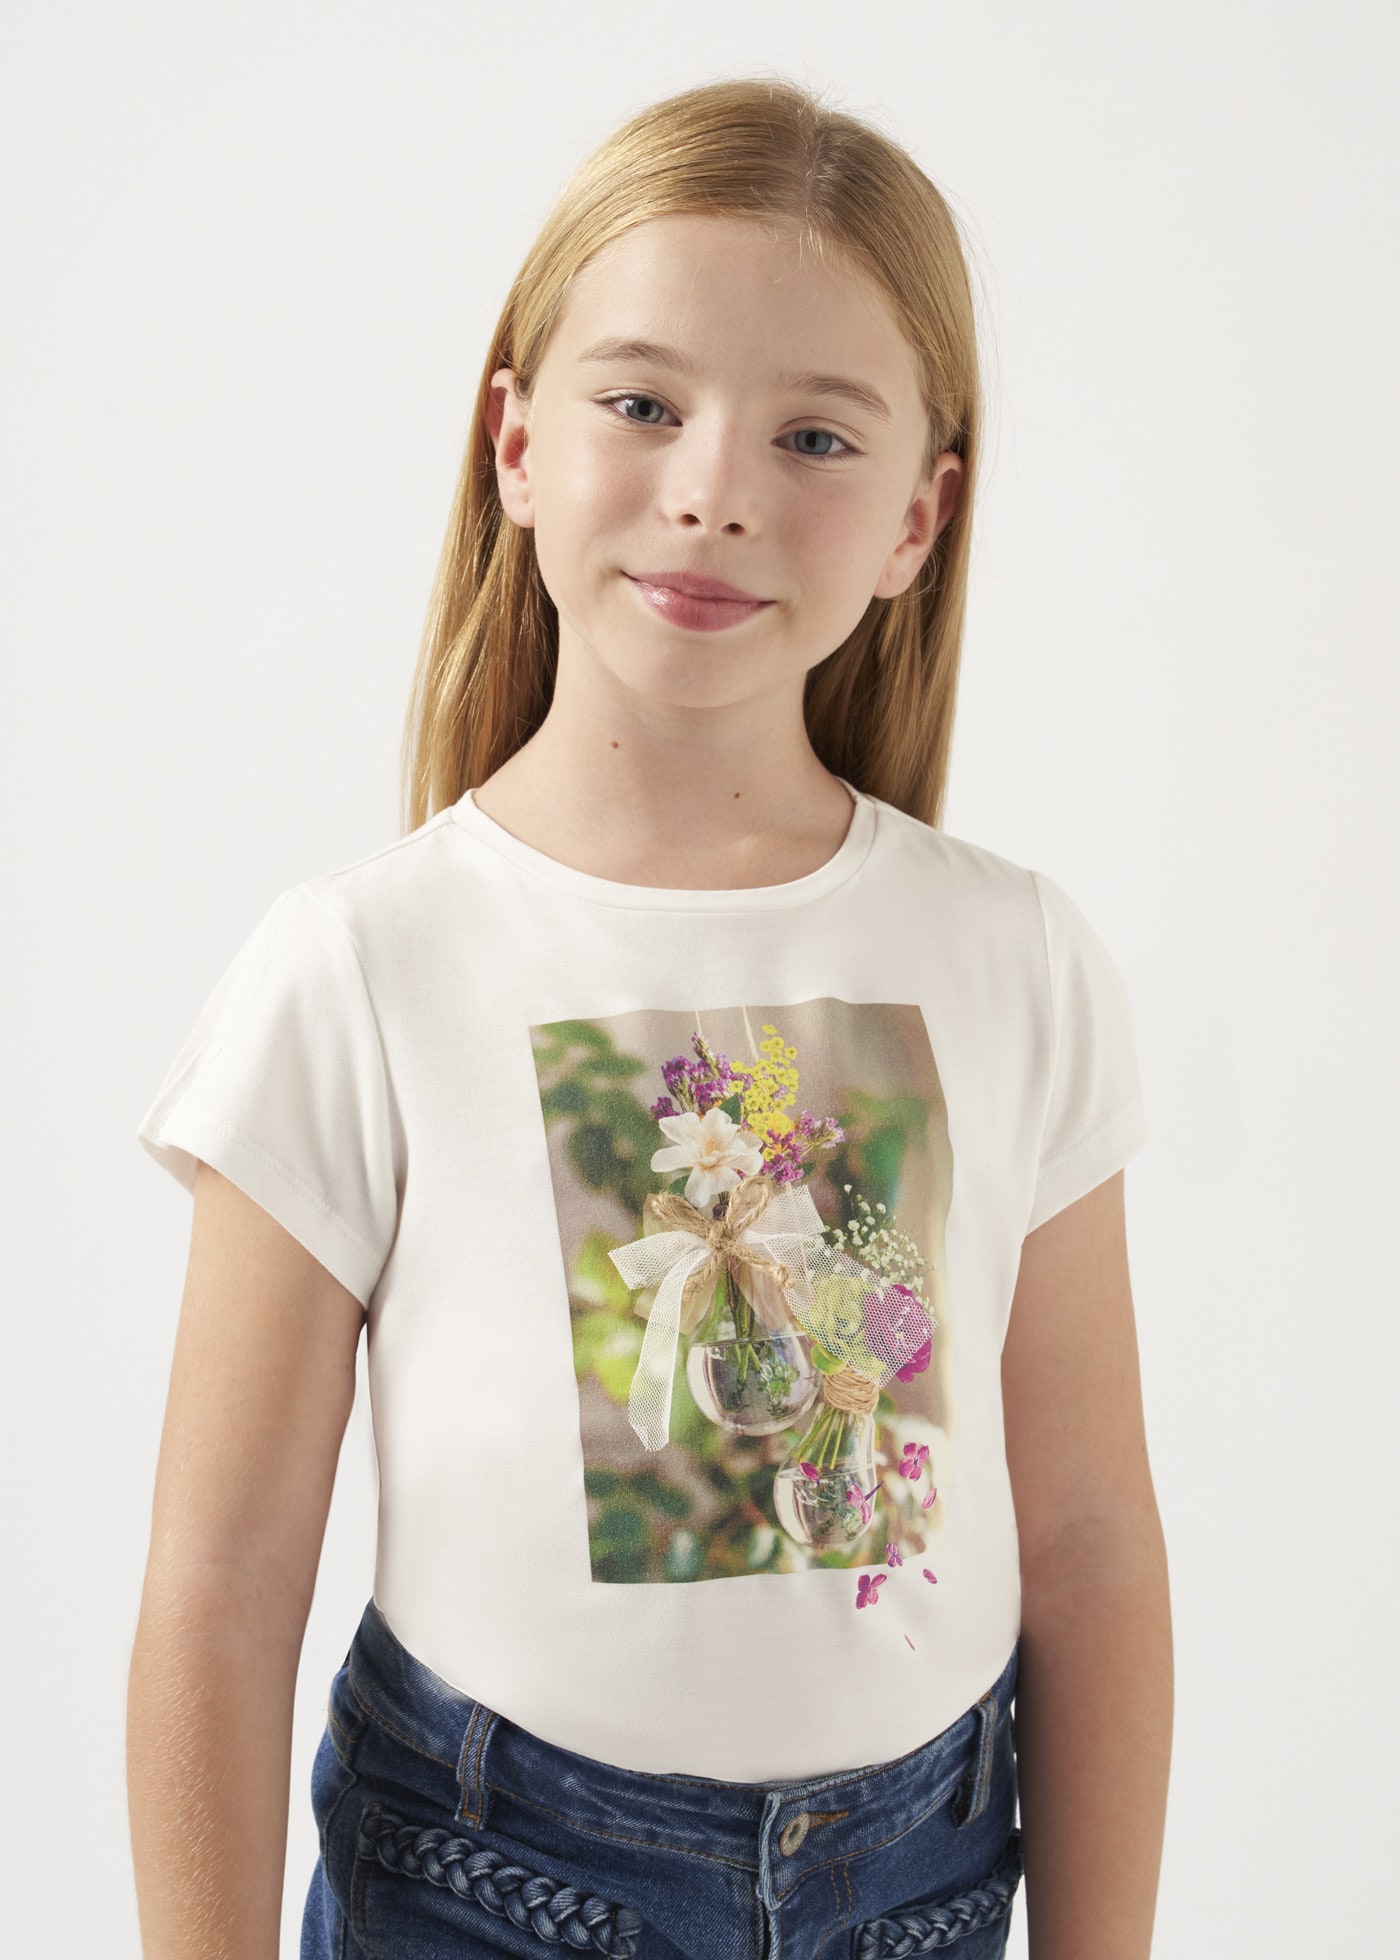 Girls t-shirt floral graphic